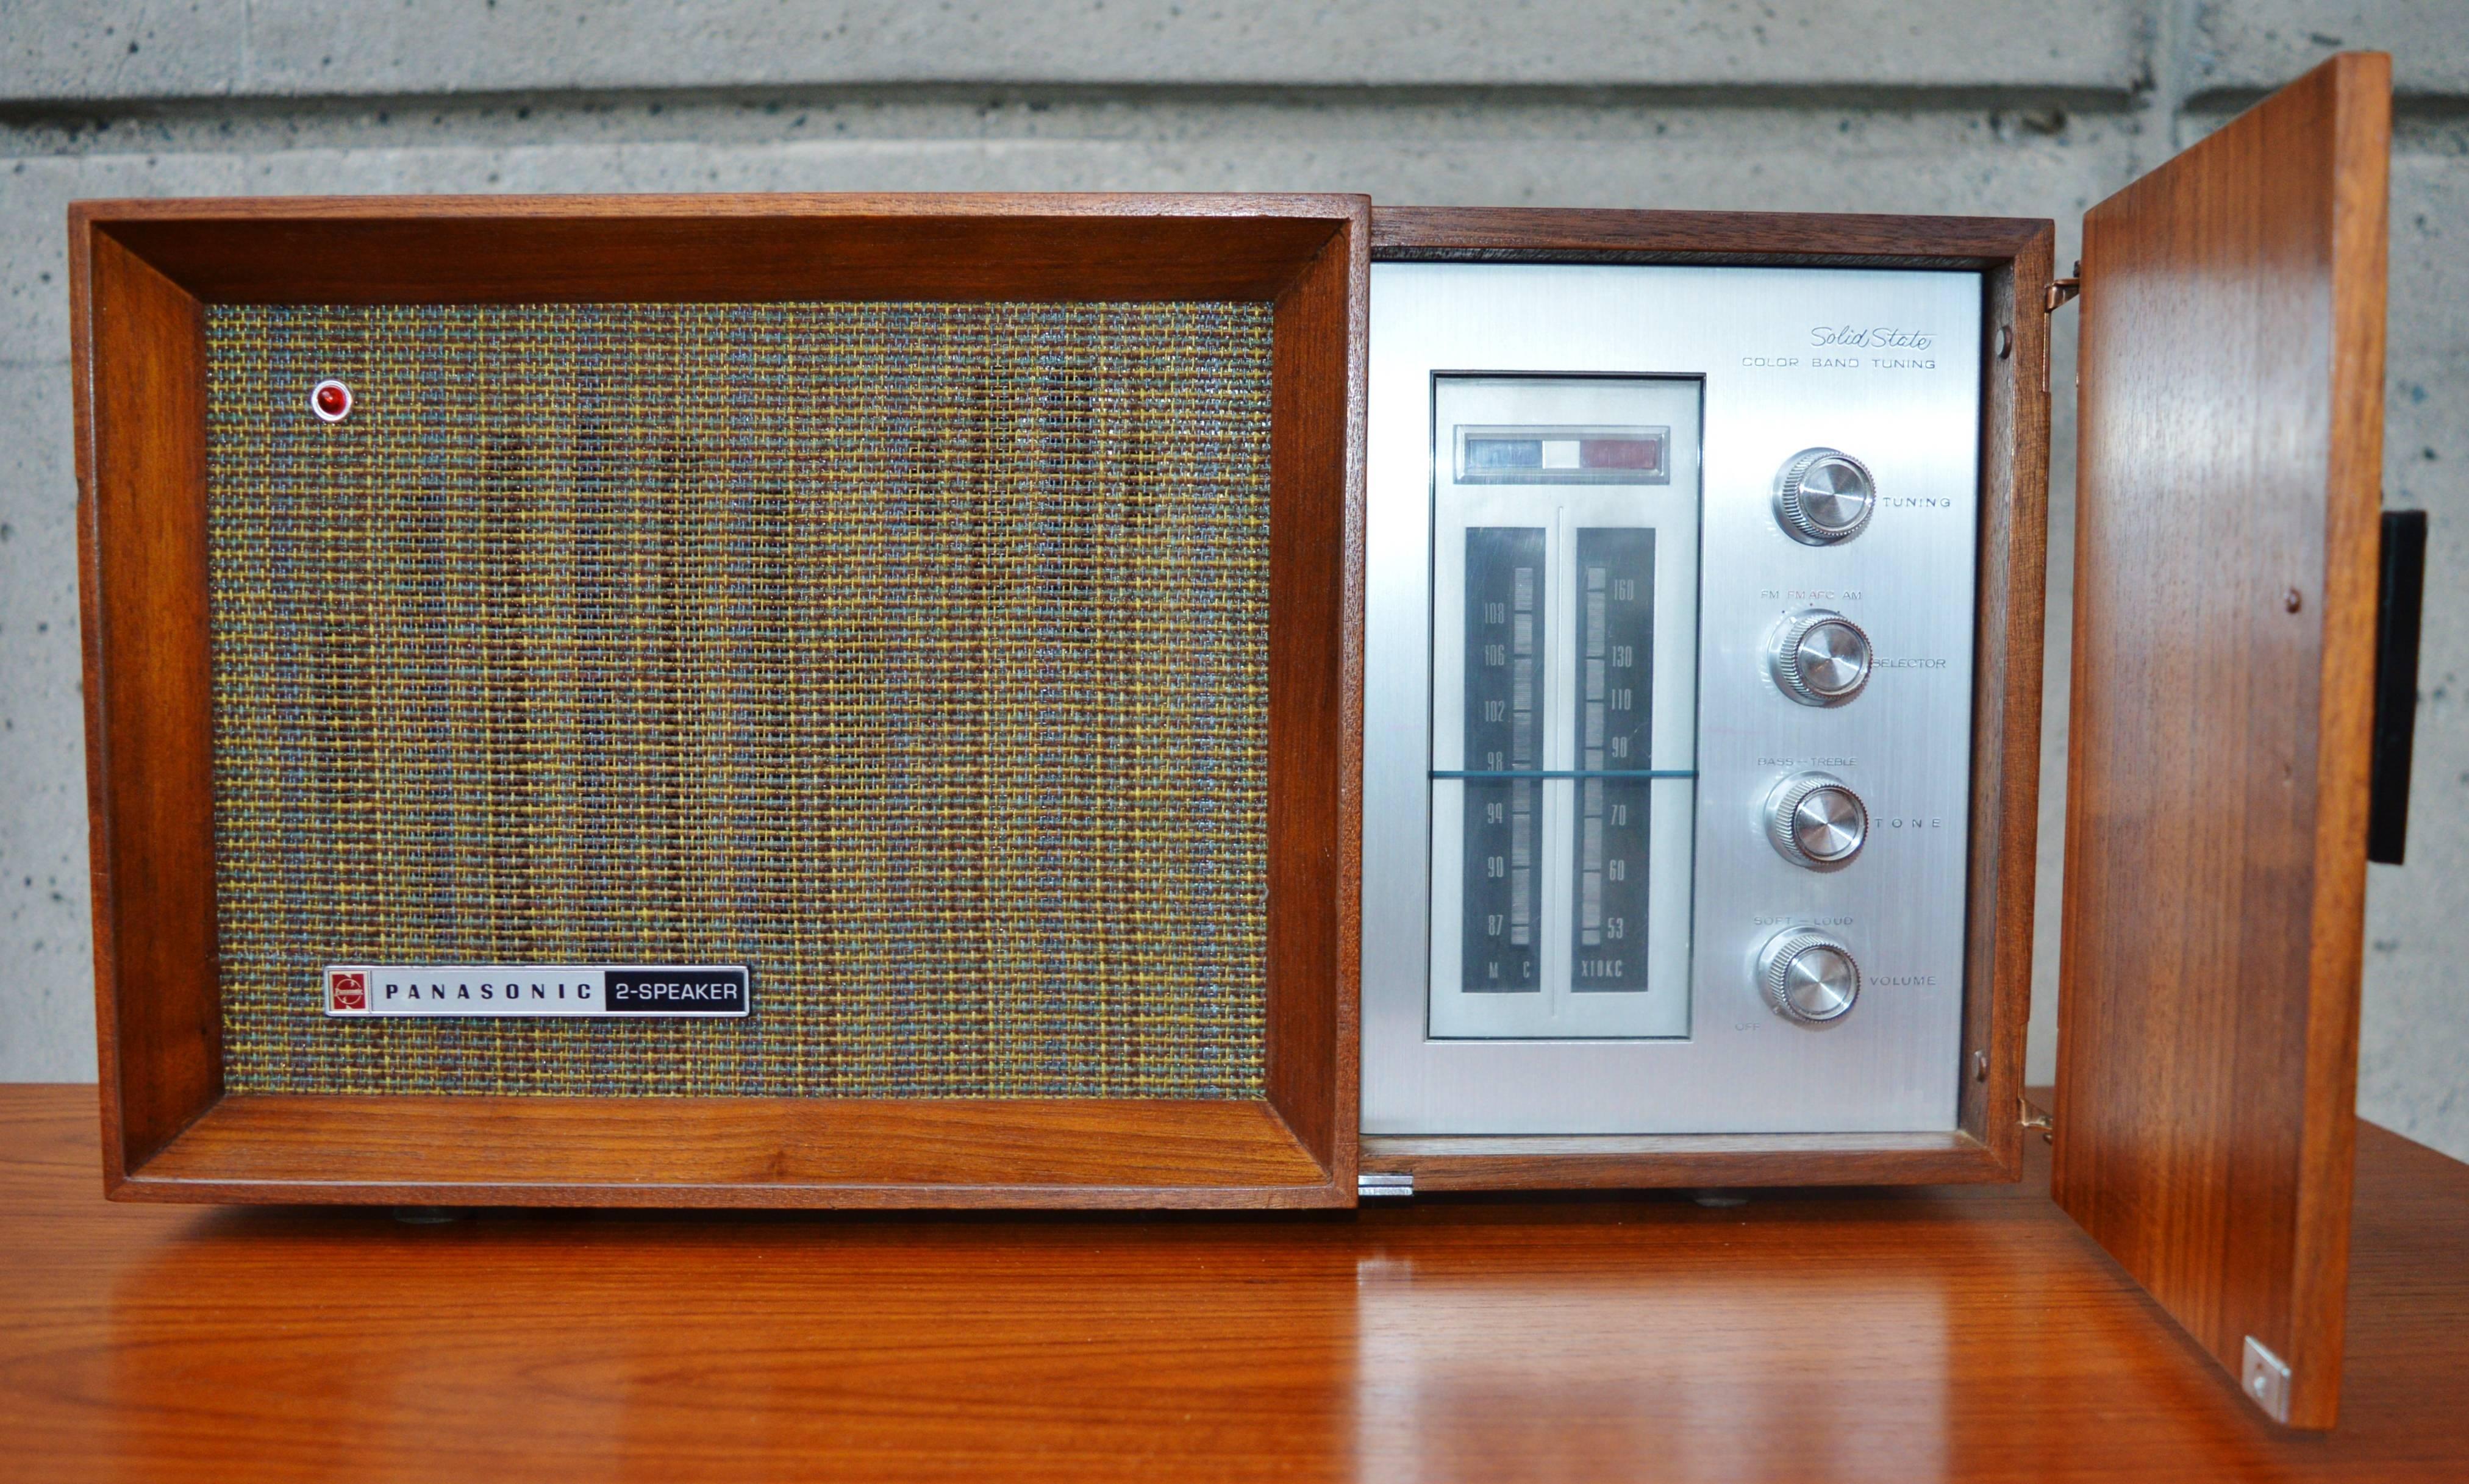 This super cool Mid-Century Modern Panasonic RE-7487 AM/FM radio is a rare model where the controls are hidden behind a door and so it is a lovely looking cabinet with the controls out of sight. Featuring a teak cabinet, with a hinged door that